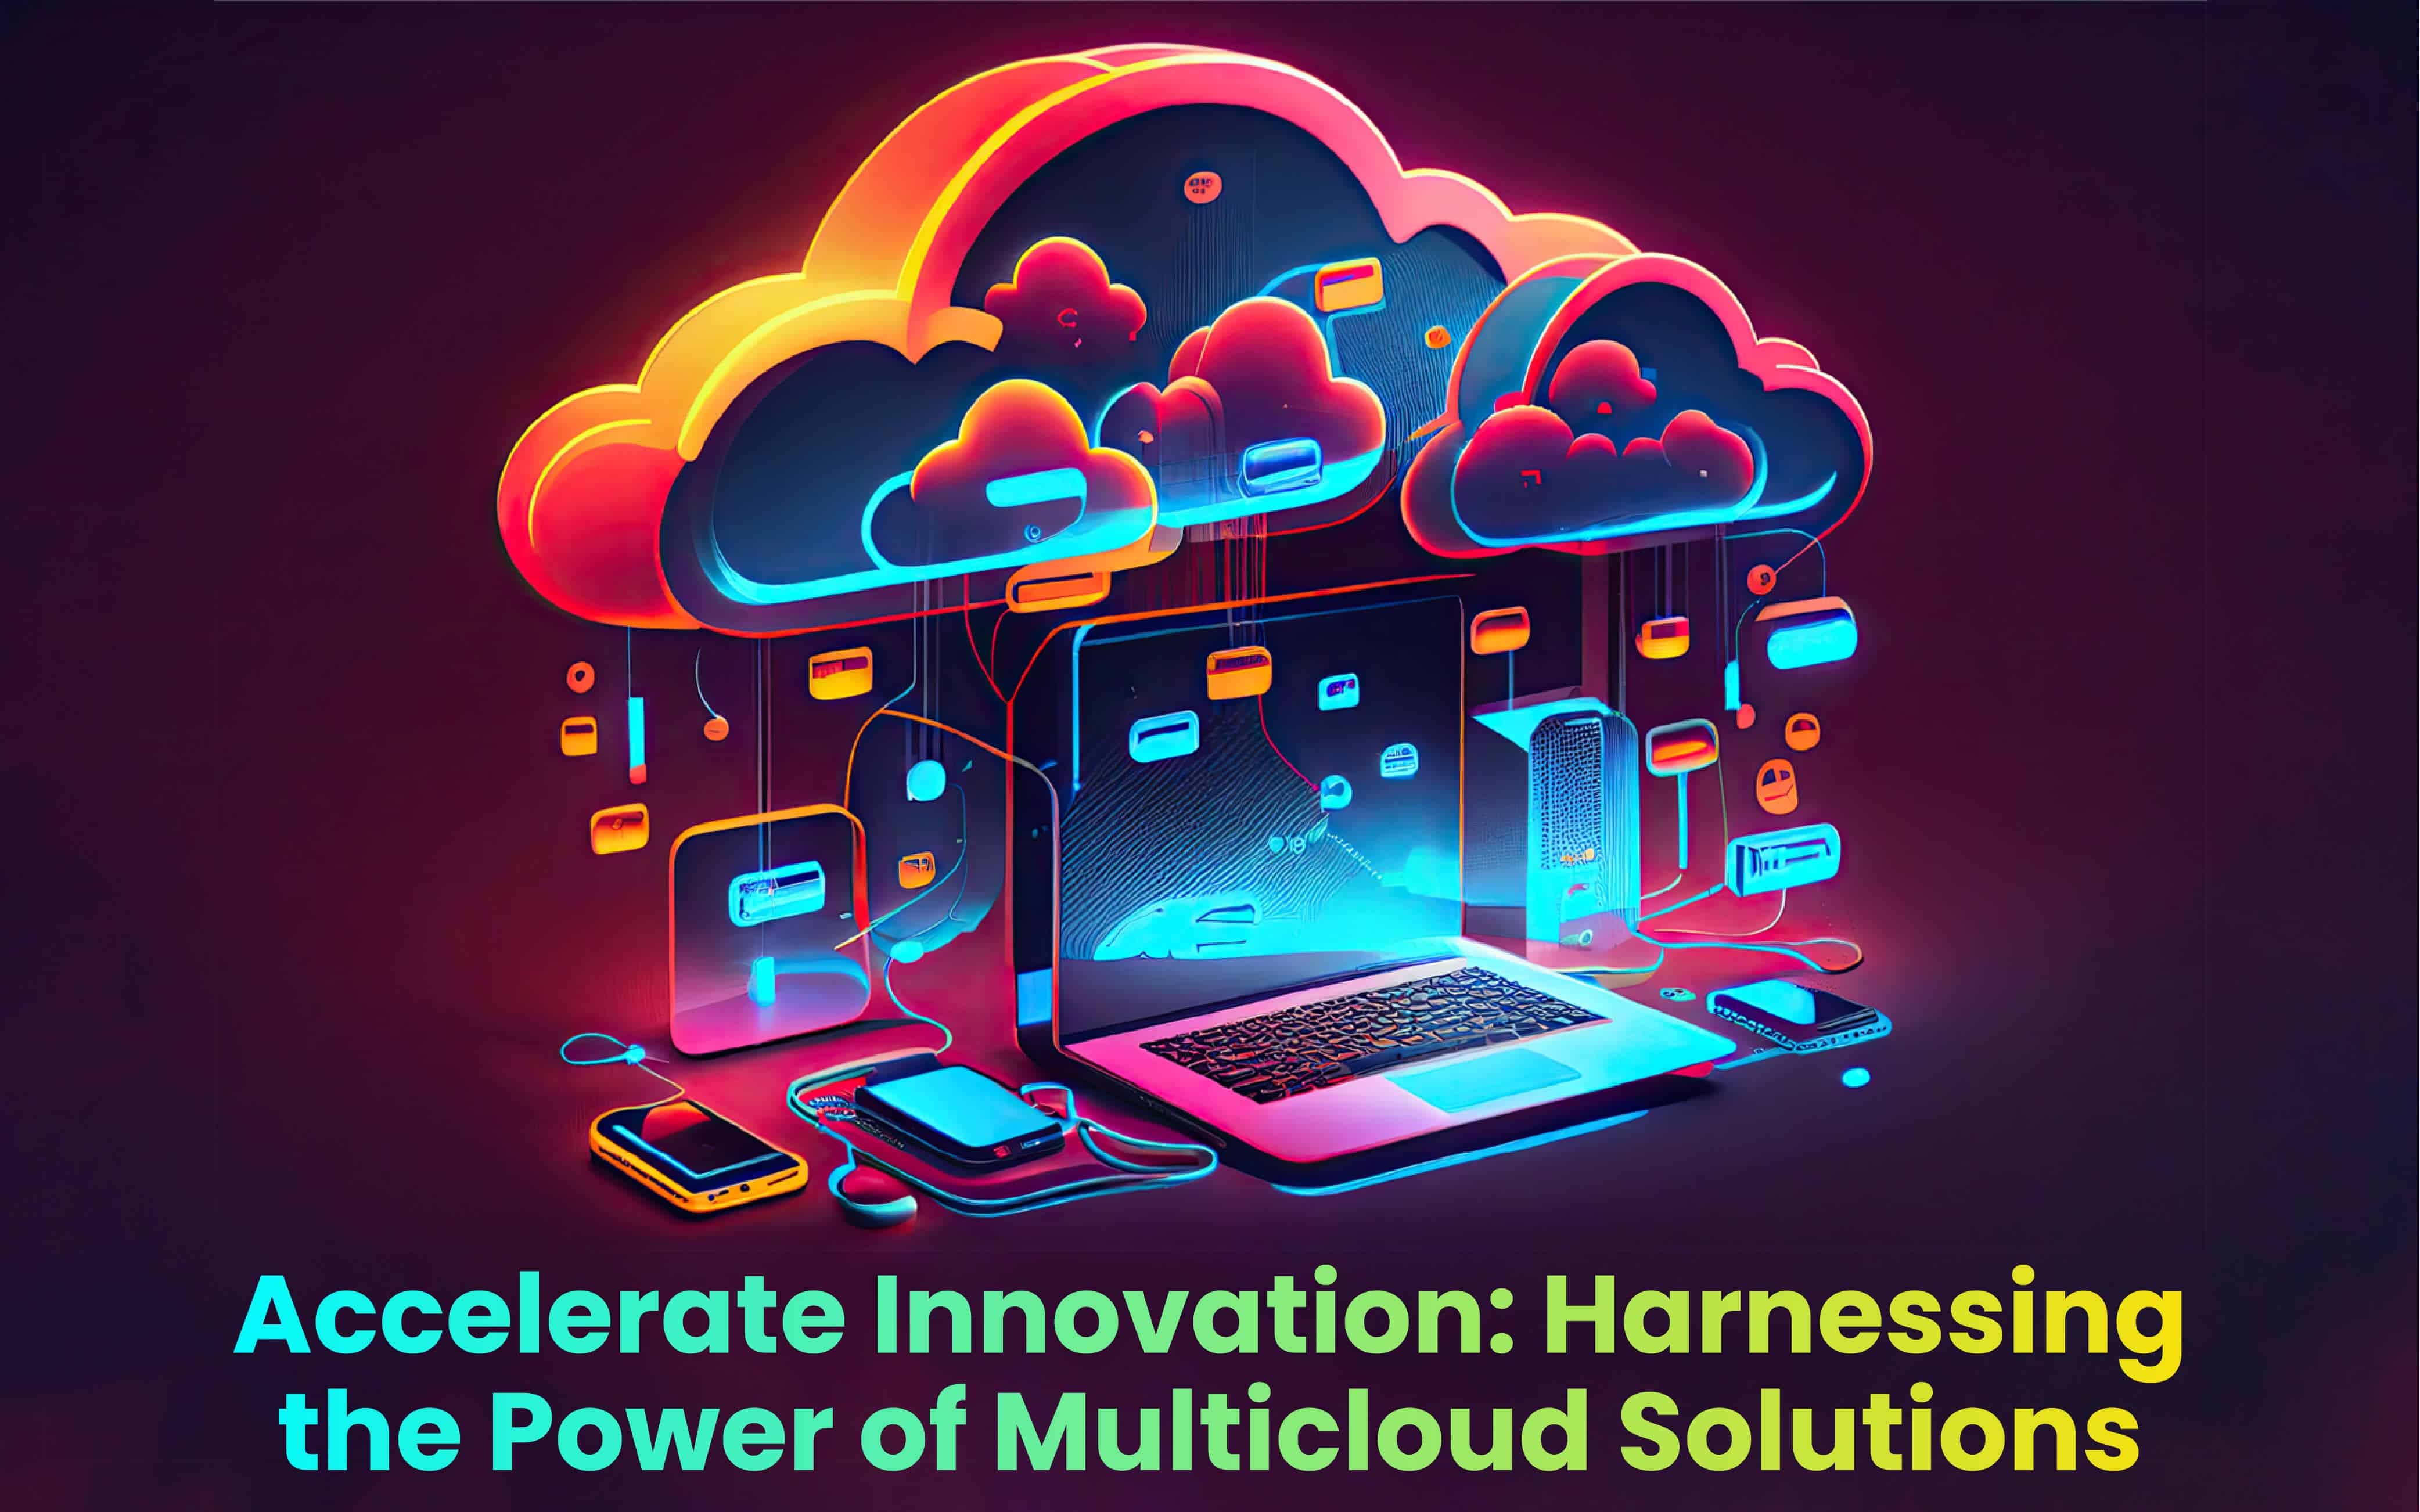 Accelerate Innovation: Harnessing the Power of Multicloud Solutions